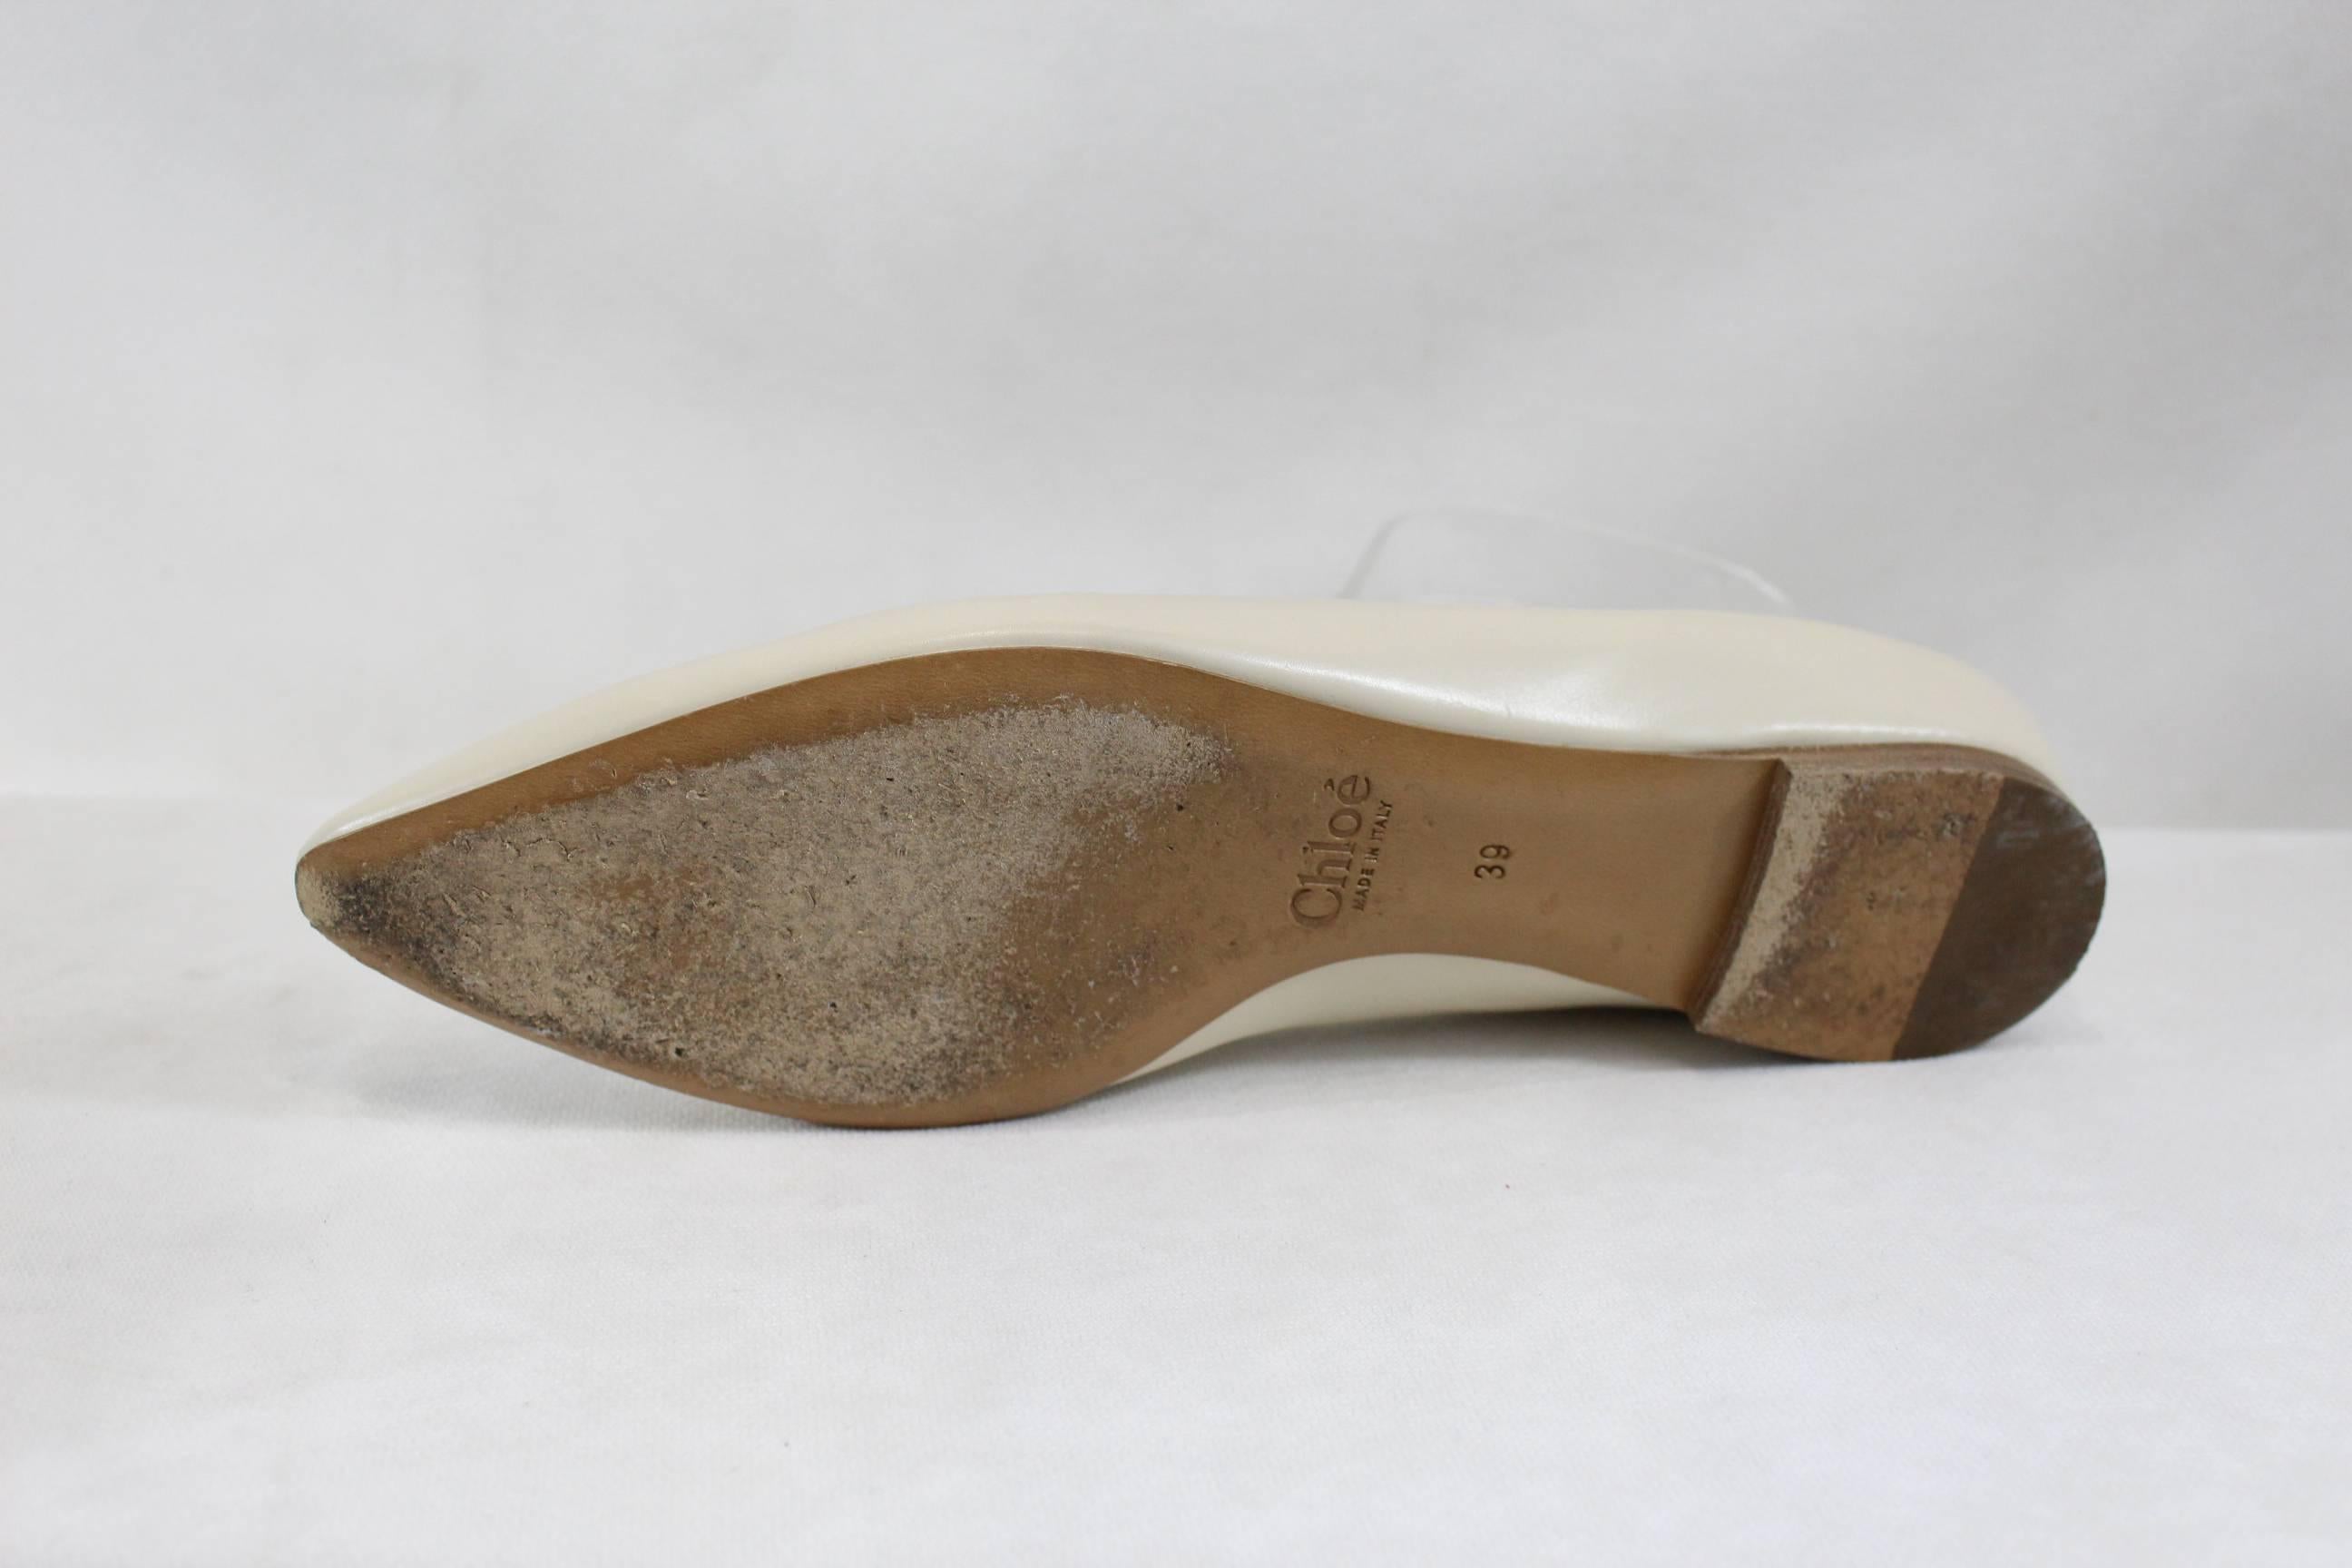 Nice Chloe Flat shoes in white leather.

They have been used l;ike for a week  but they remained in really good condition